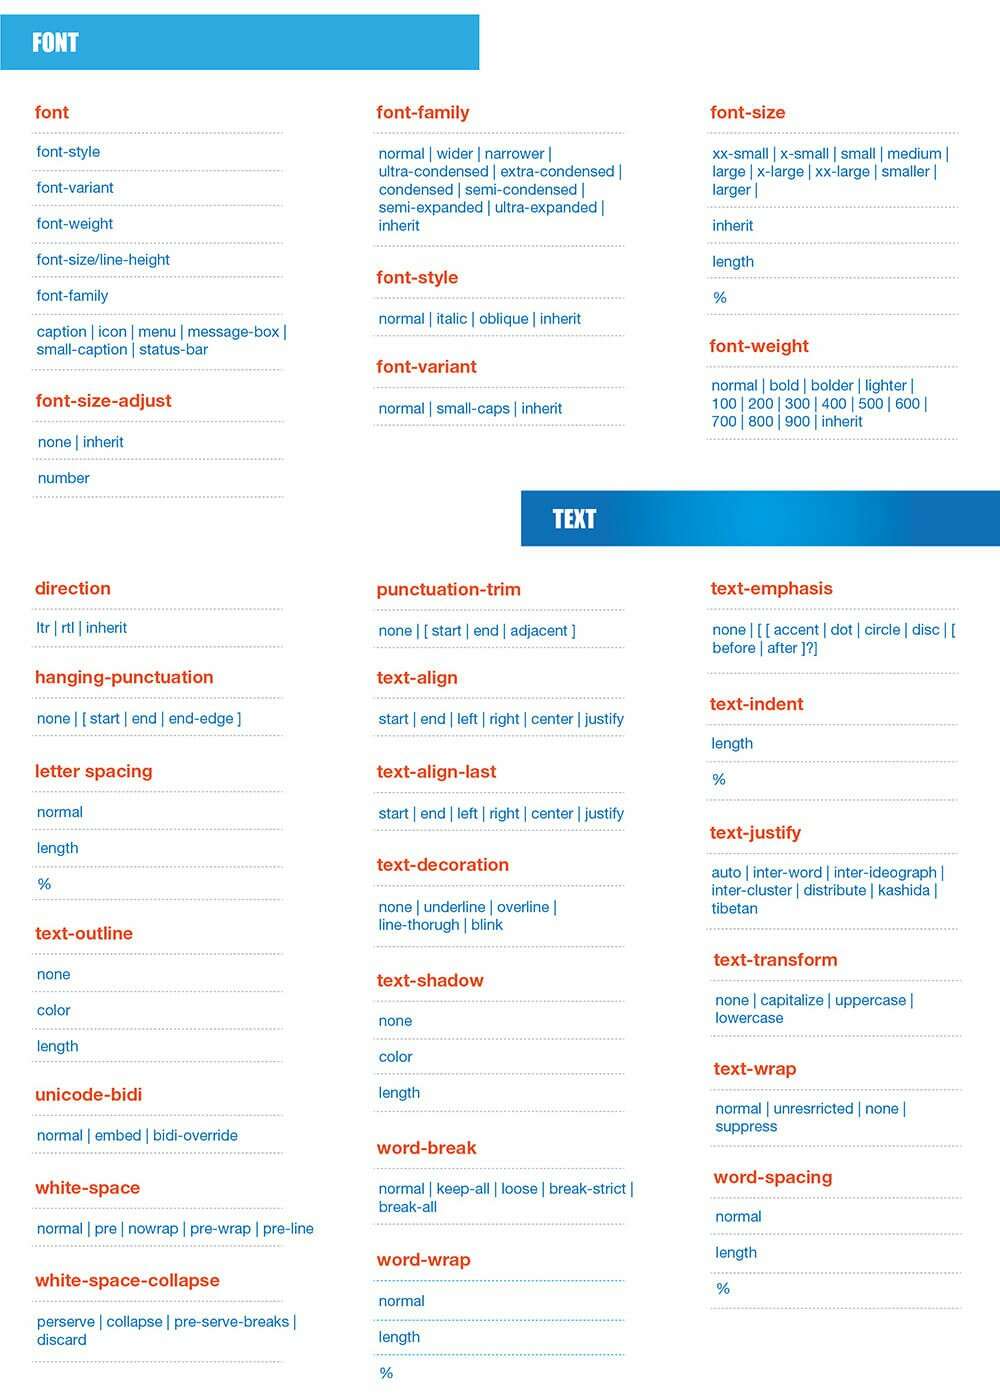 CSS3 Cheat sheet - tags and attributes